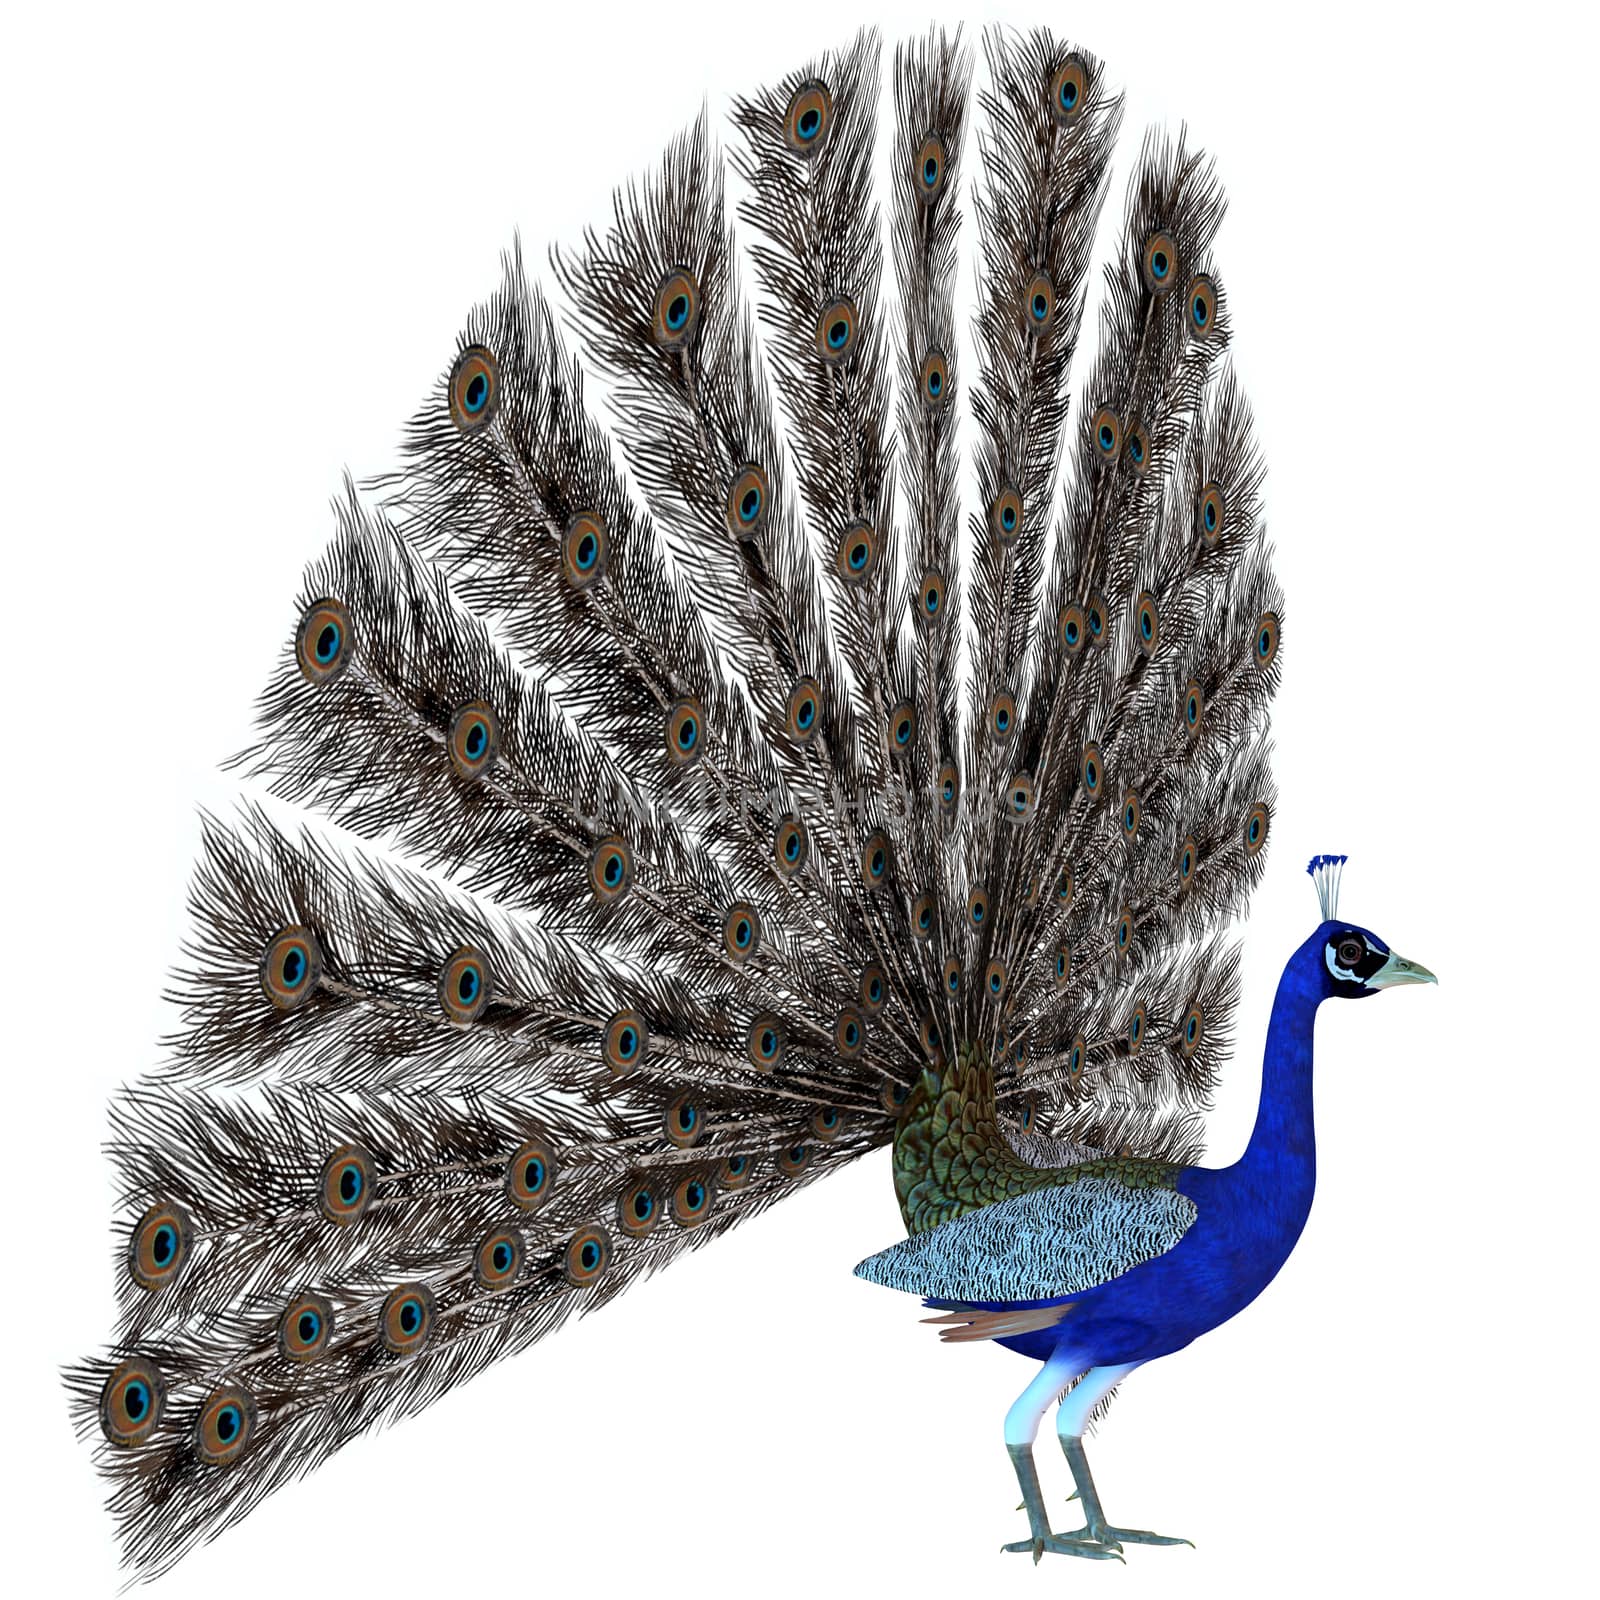 A male Peacock bird displays his tail feathers in a courtship ritual for the species.